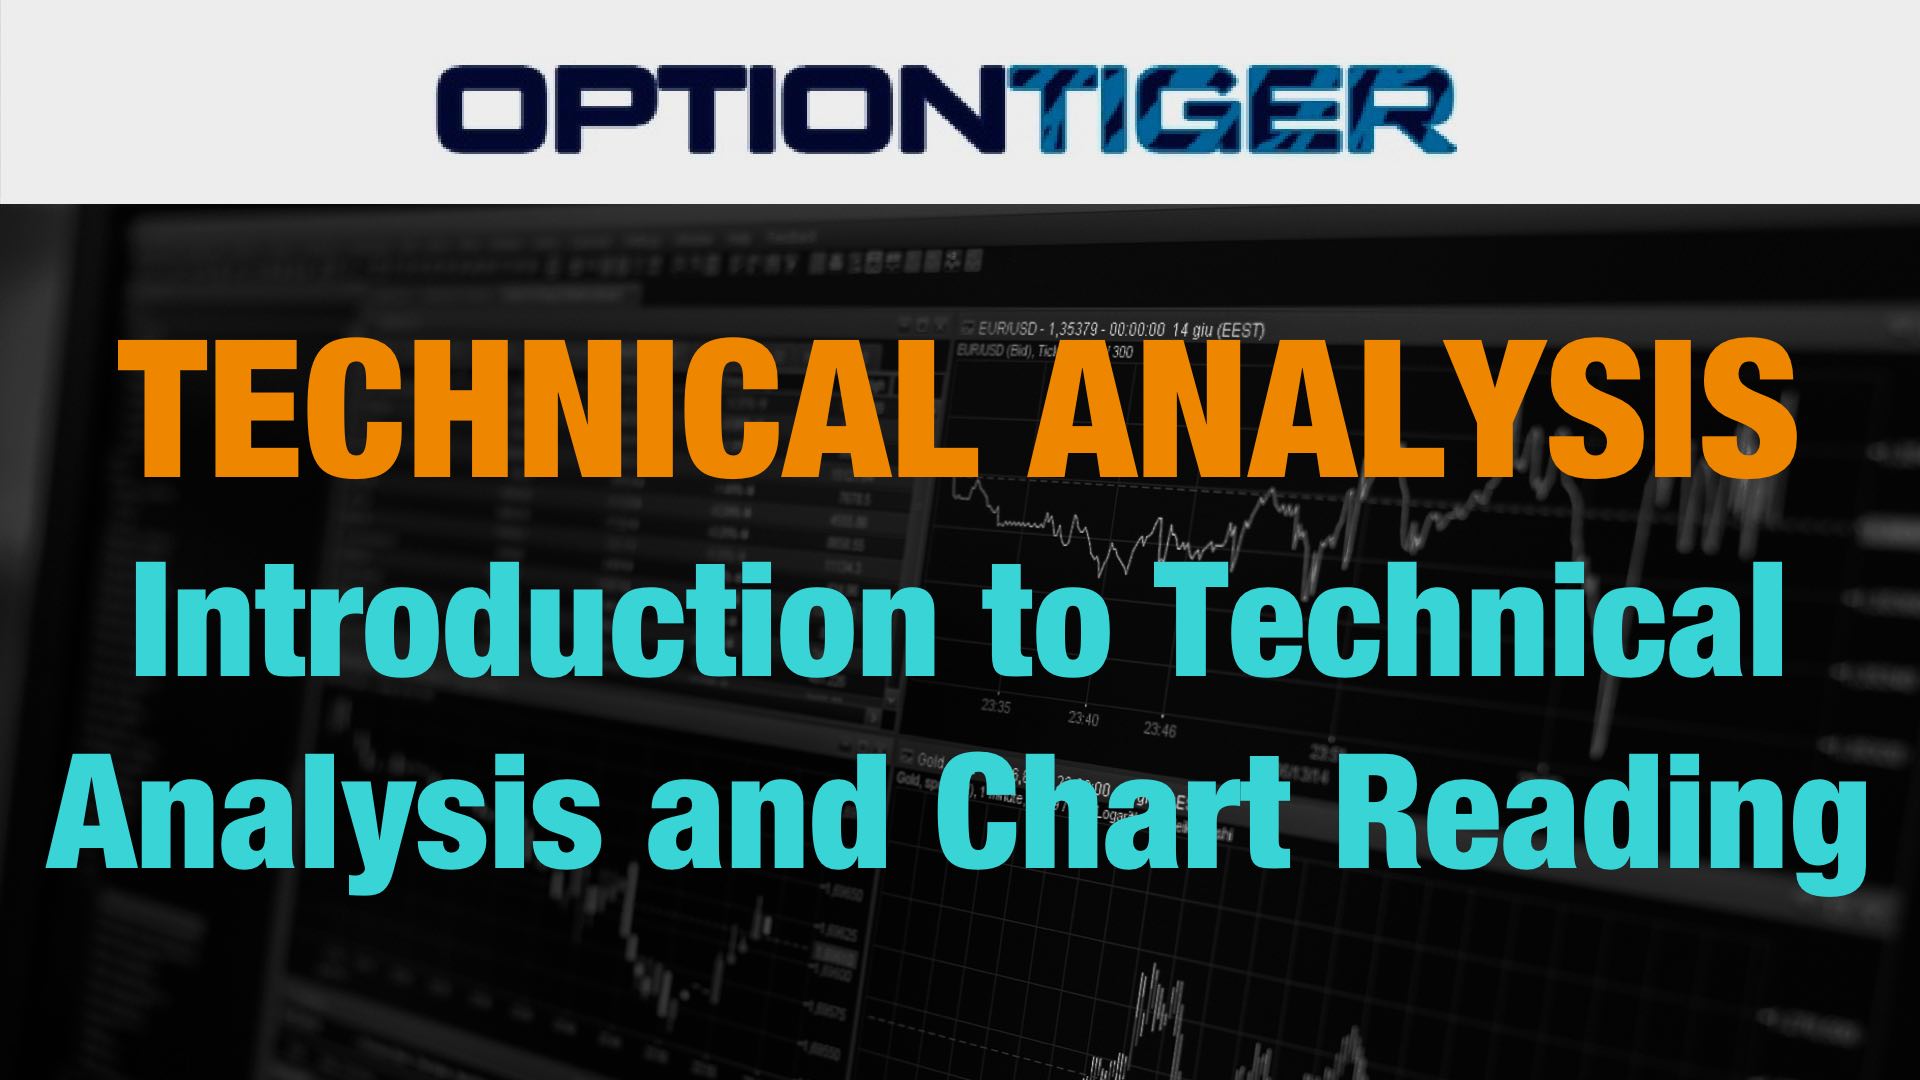 Technical Chart Analysis Course